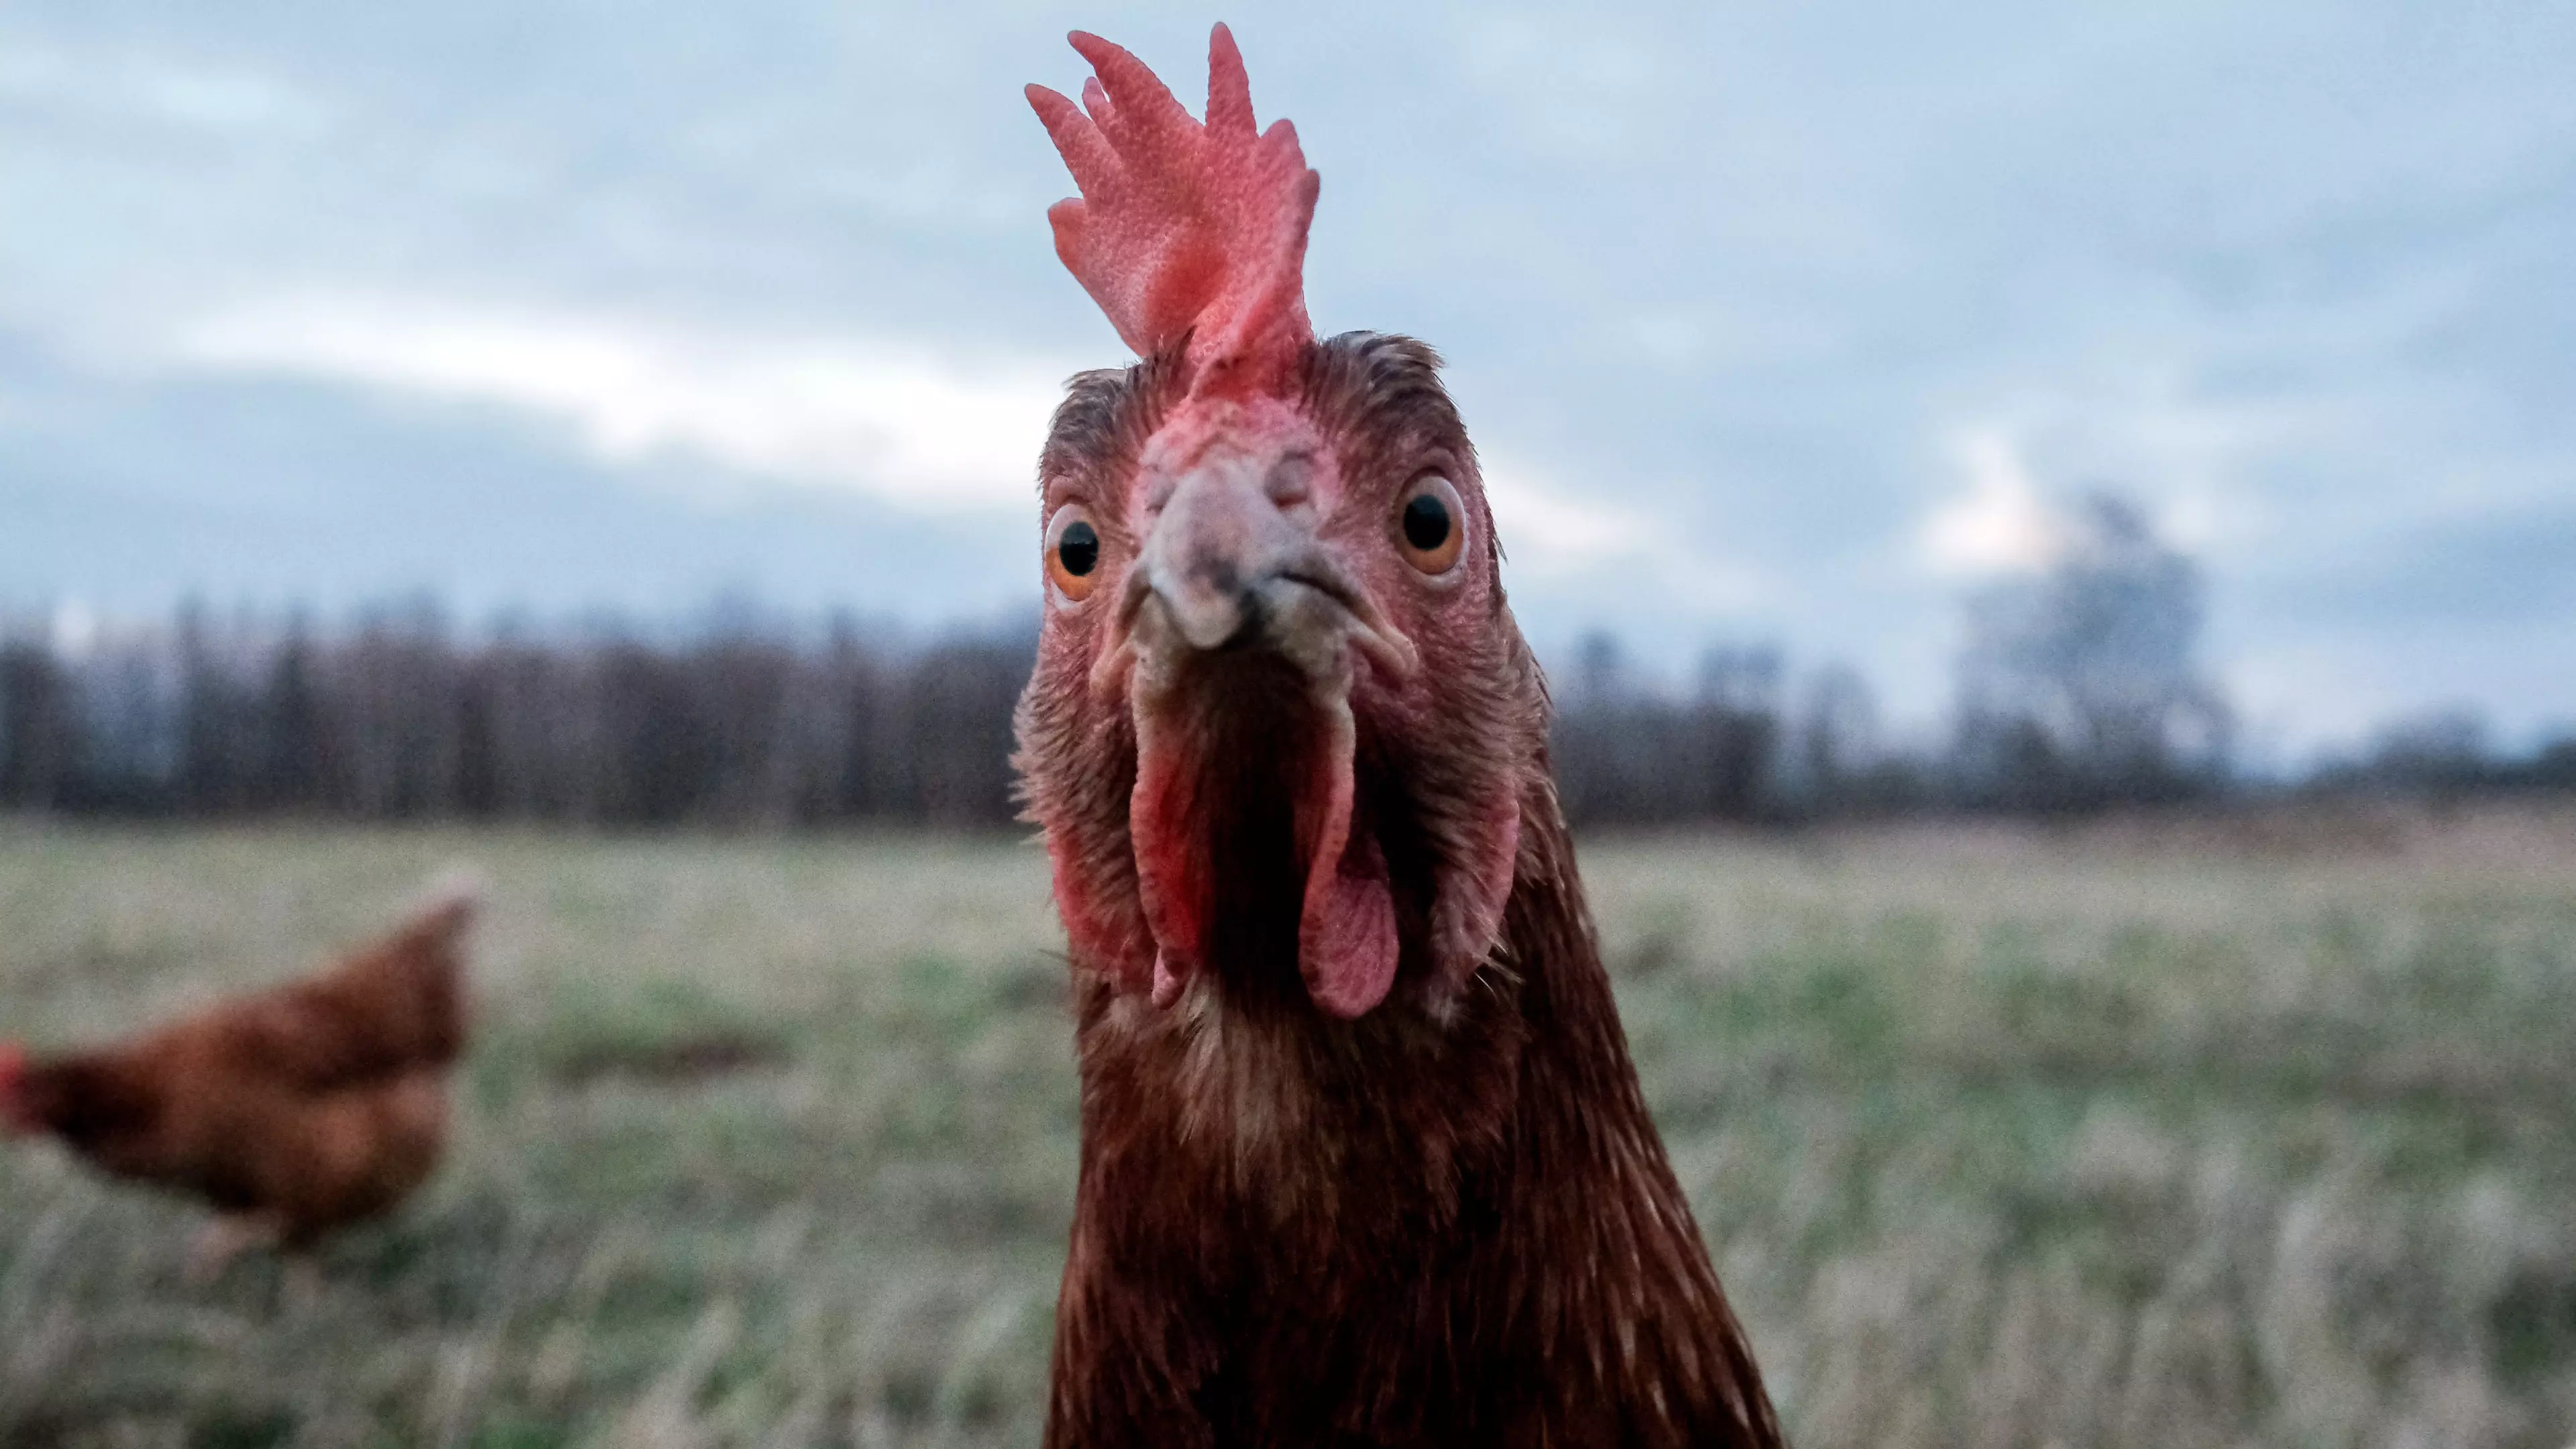 PETA Wants People To Stop Calling Others 'Chicken' Or 'Pig' Because It's 'Speciest'